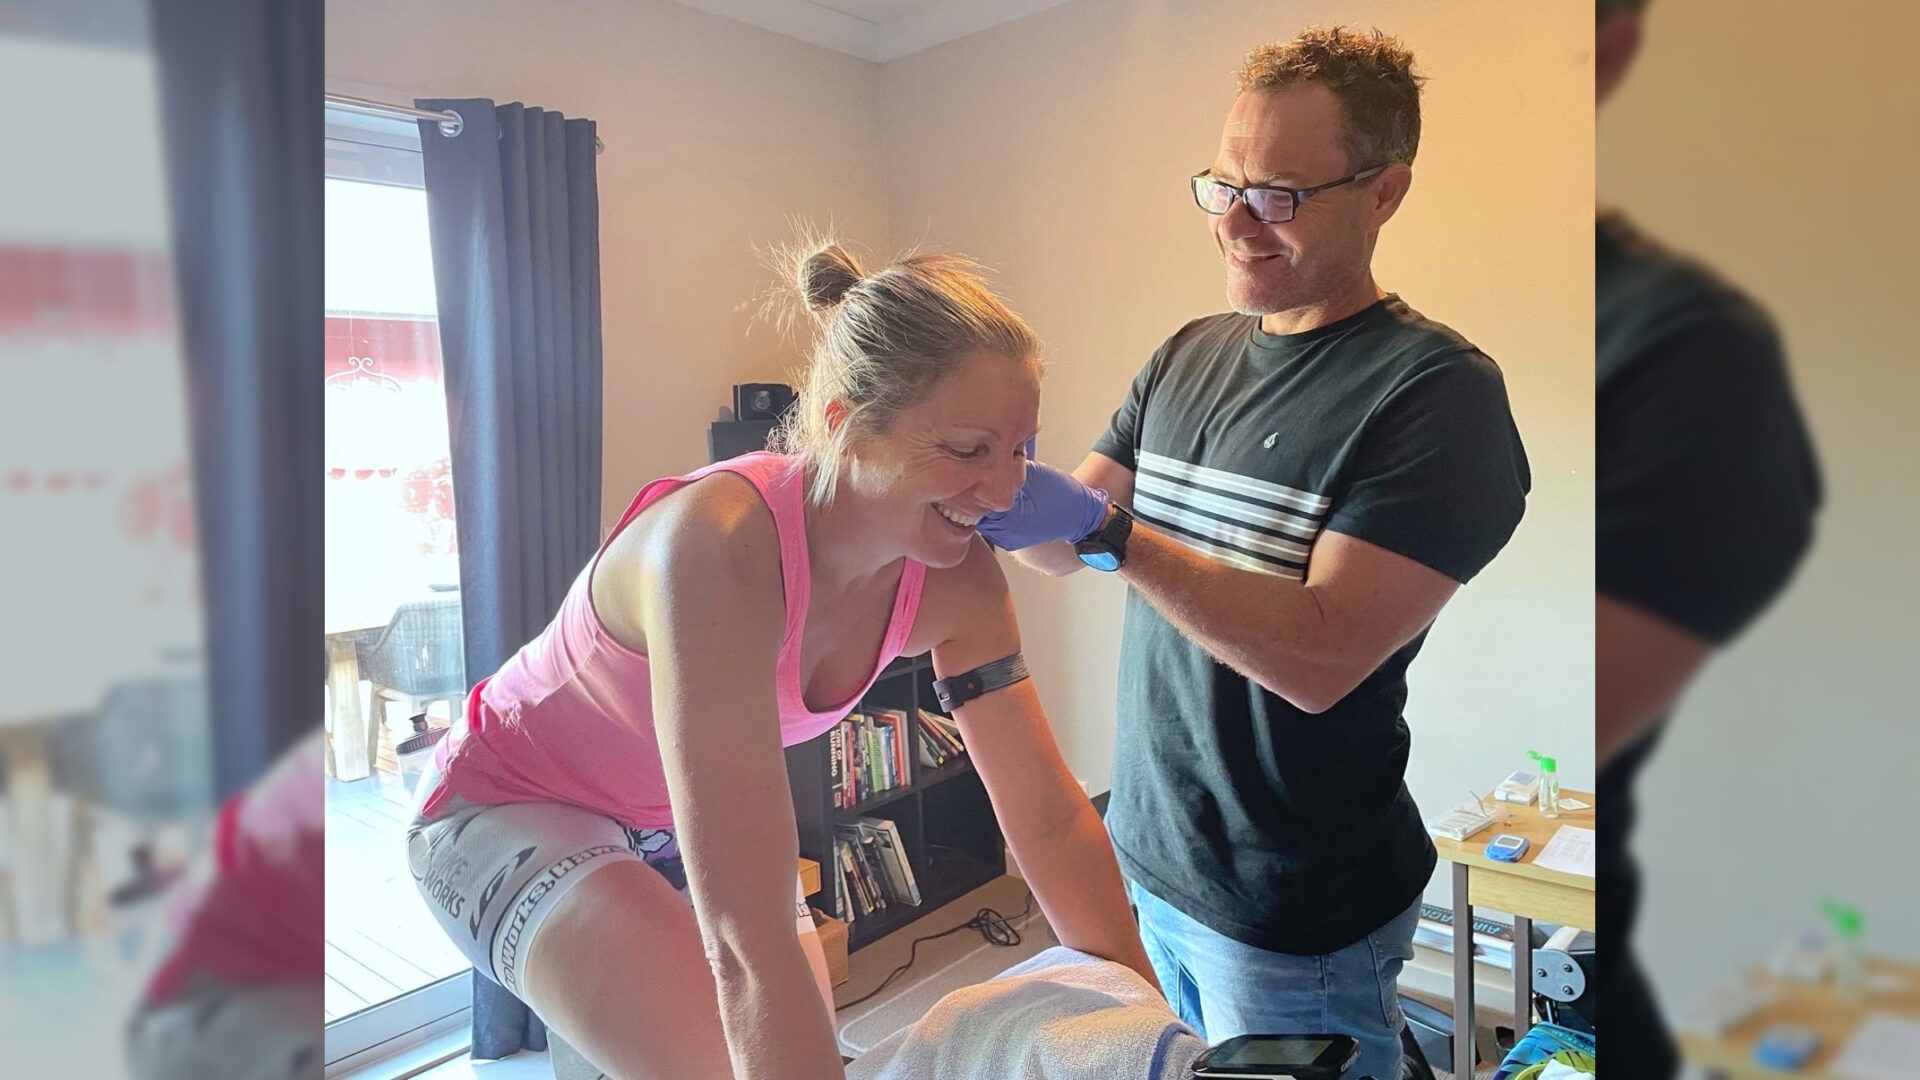 Bevan McKinnon performing a lactate test on a female athlete